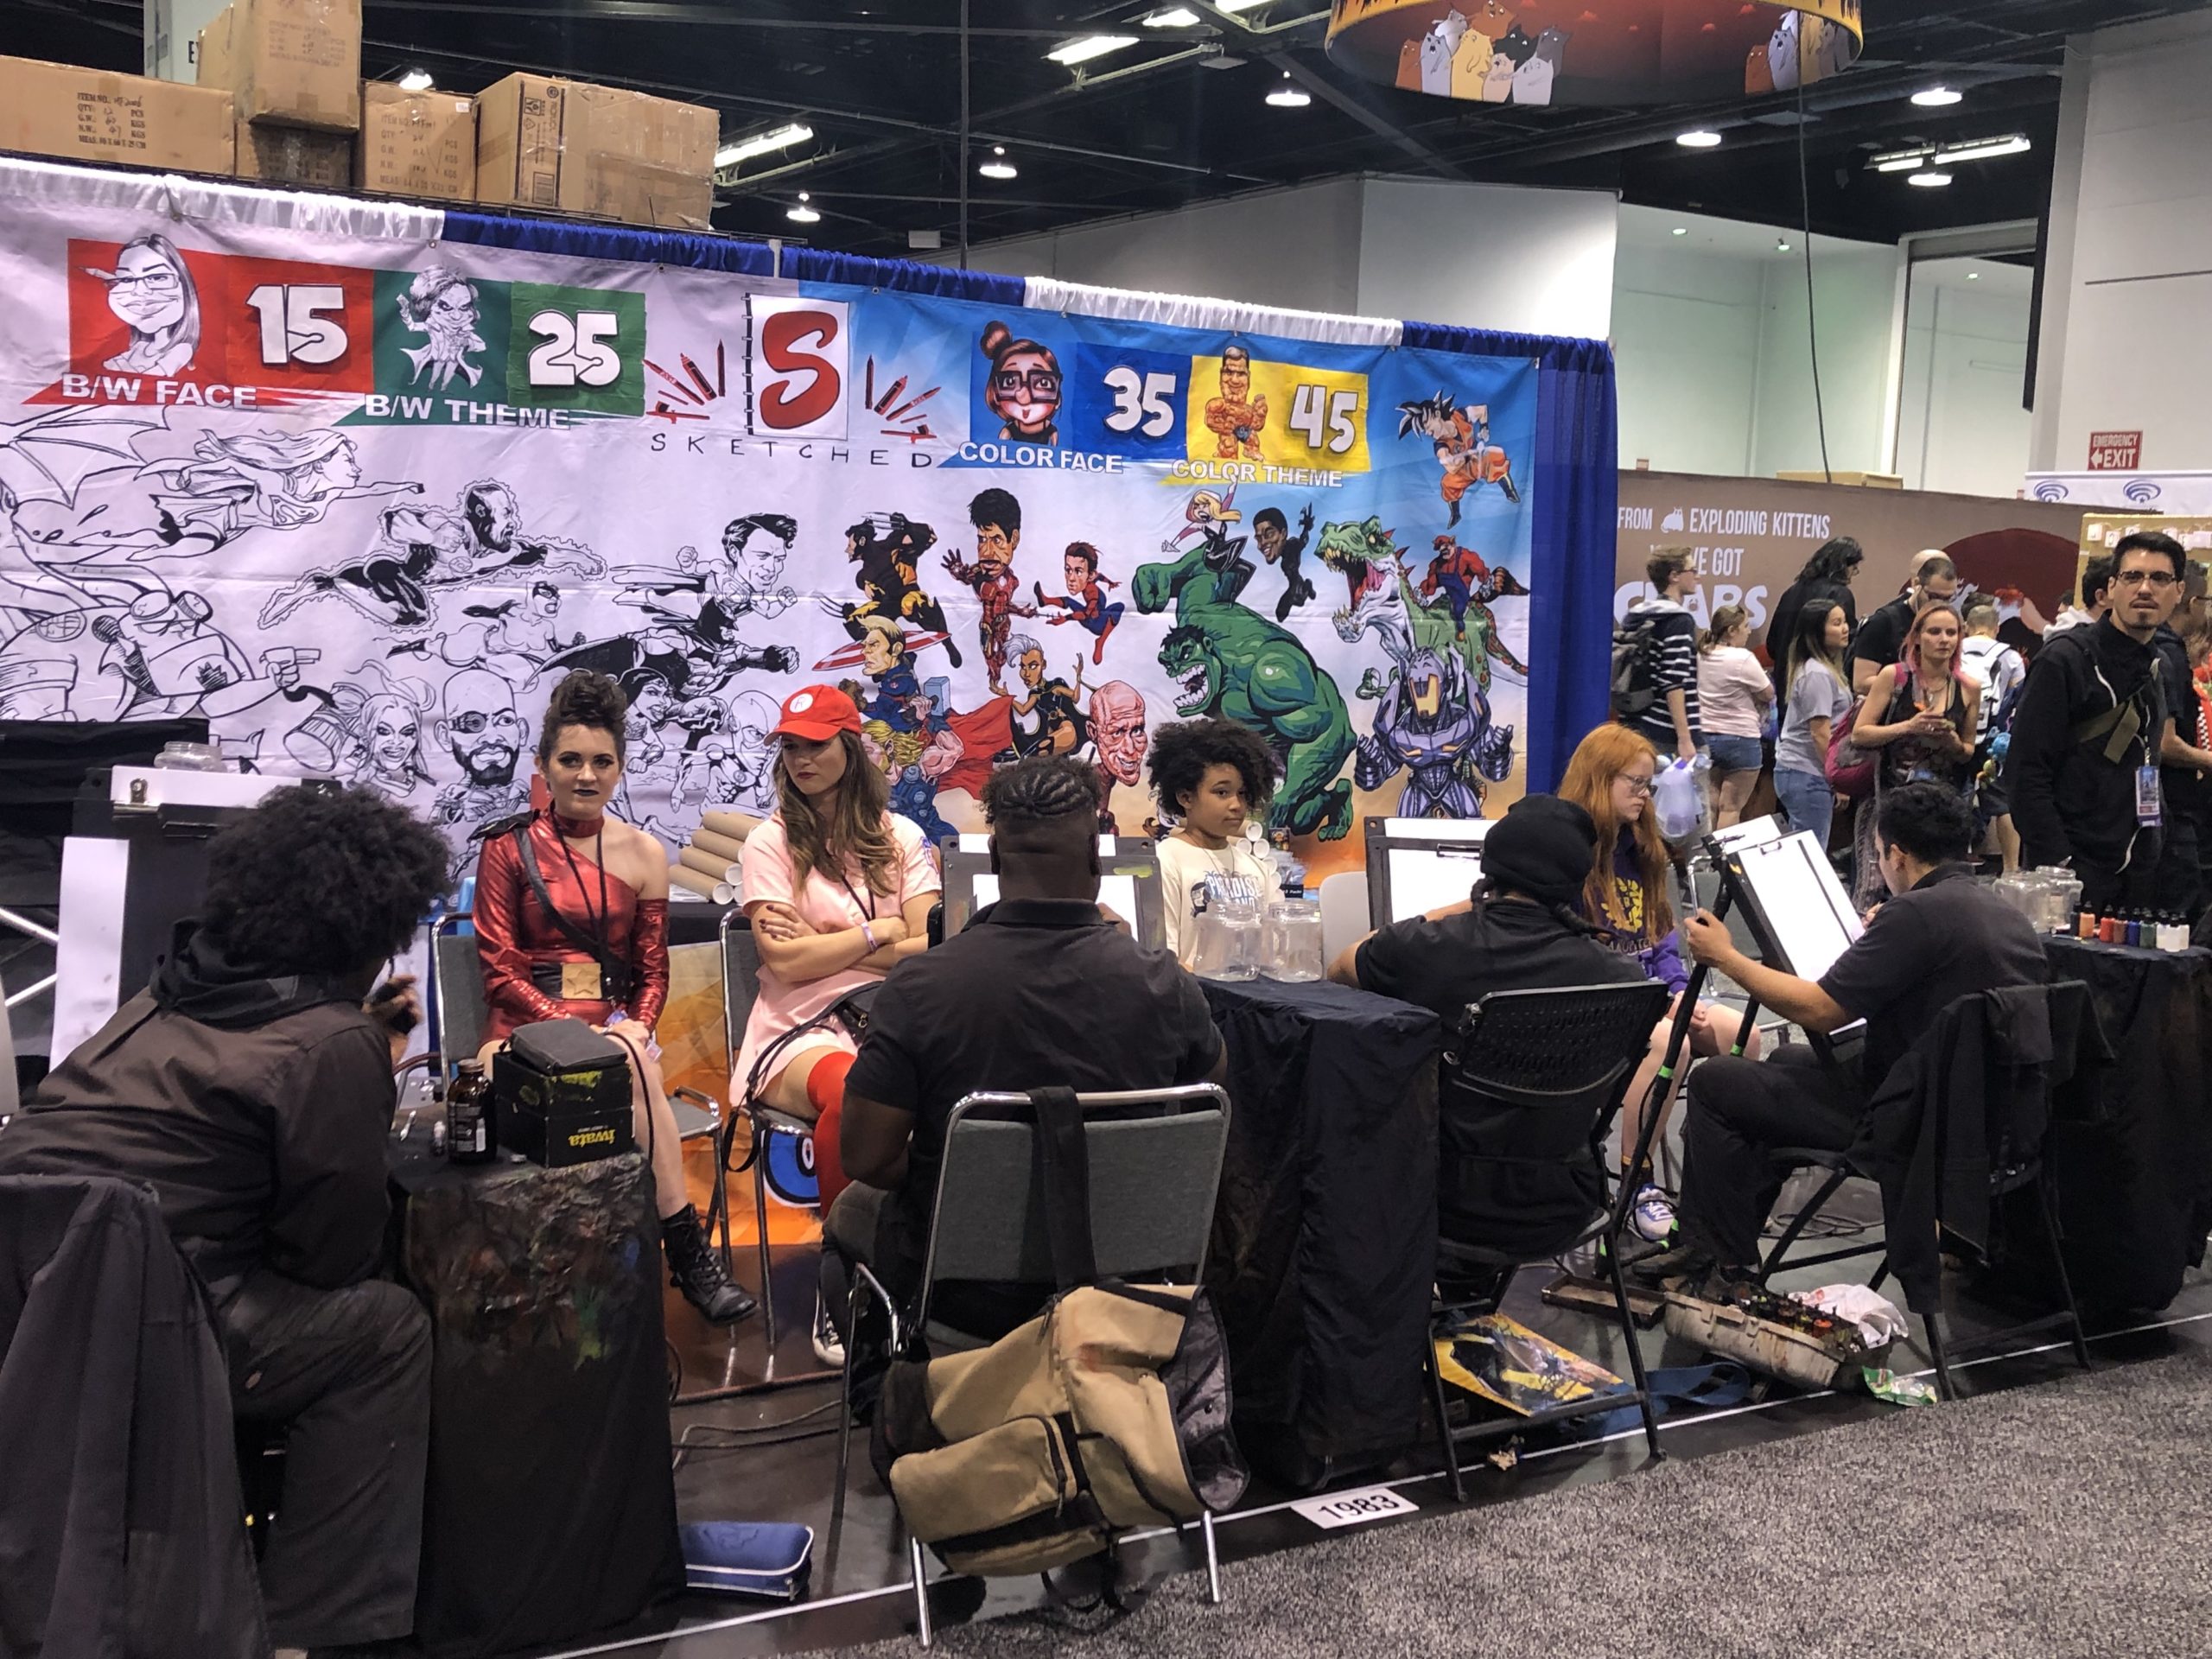 Attendees being sketched at WonderCon 2019. Photo: Danny Pham/dorkaholics.